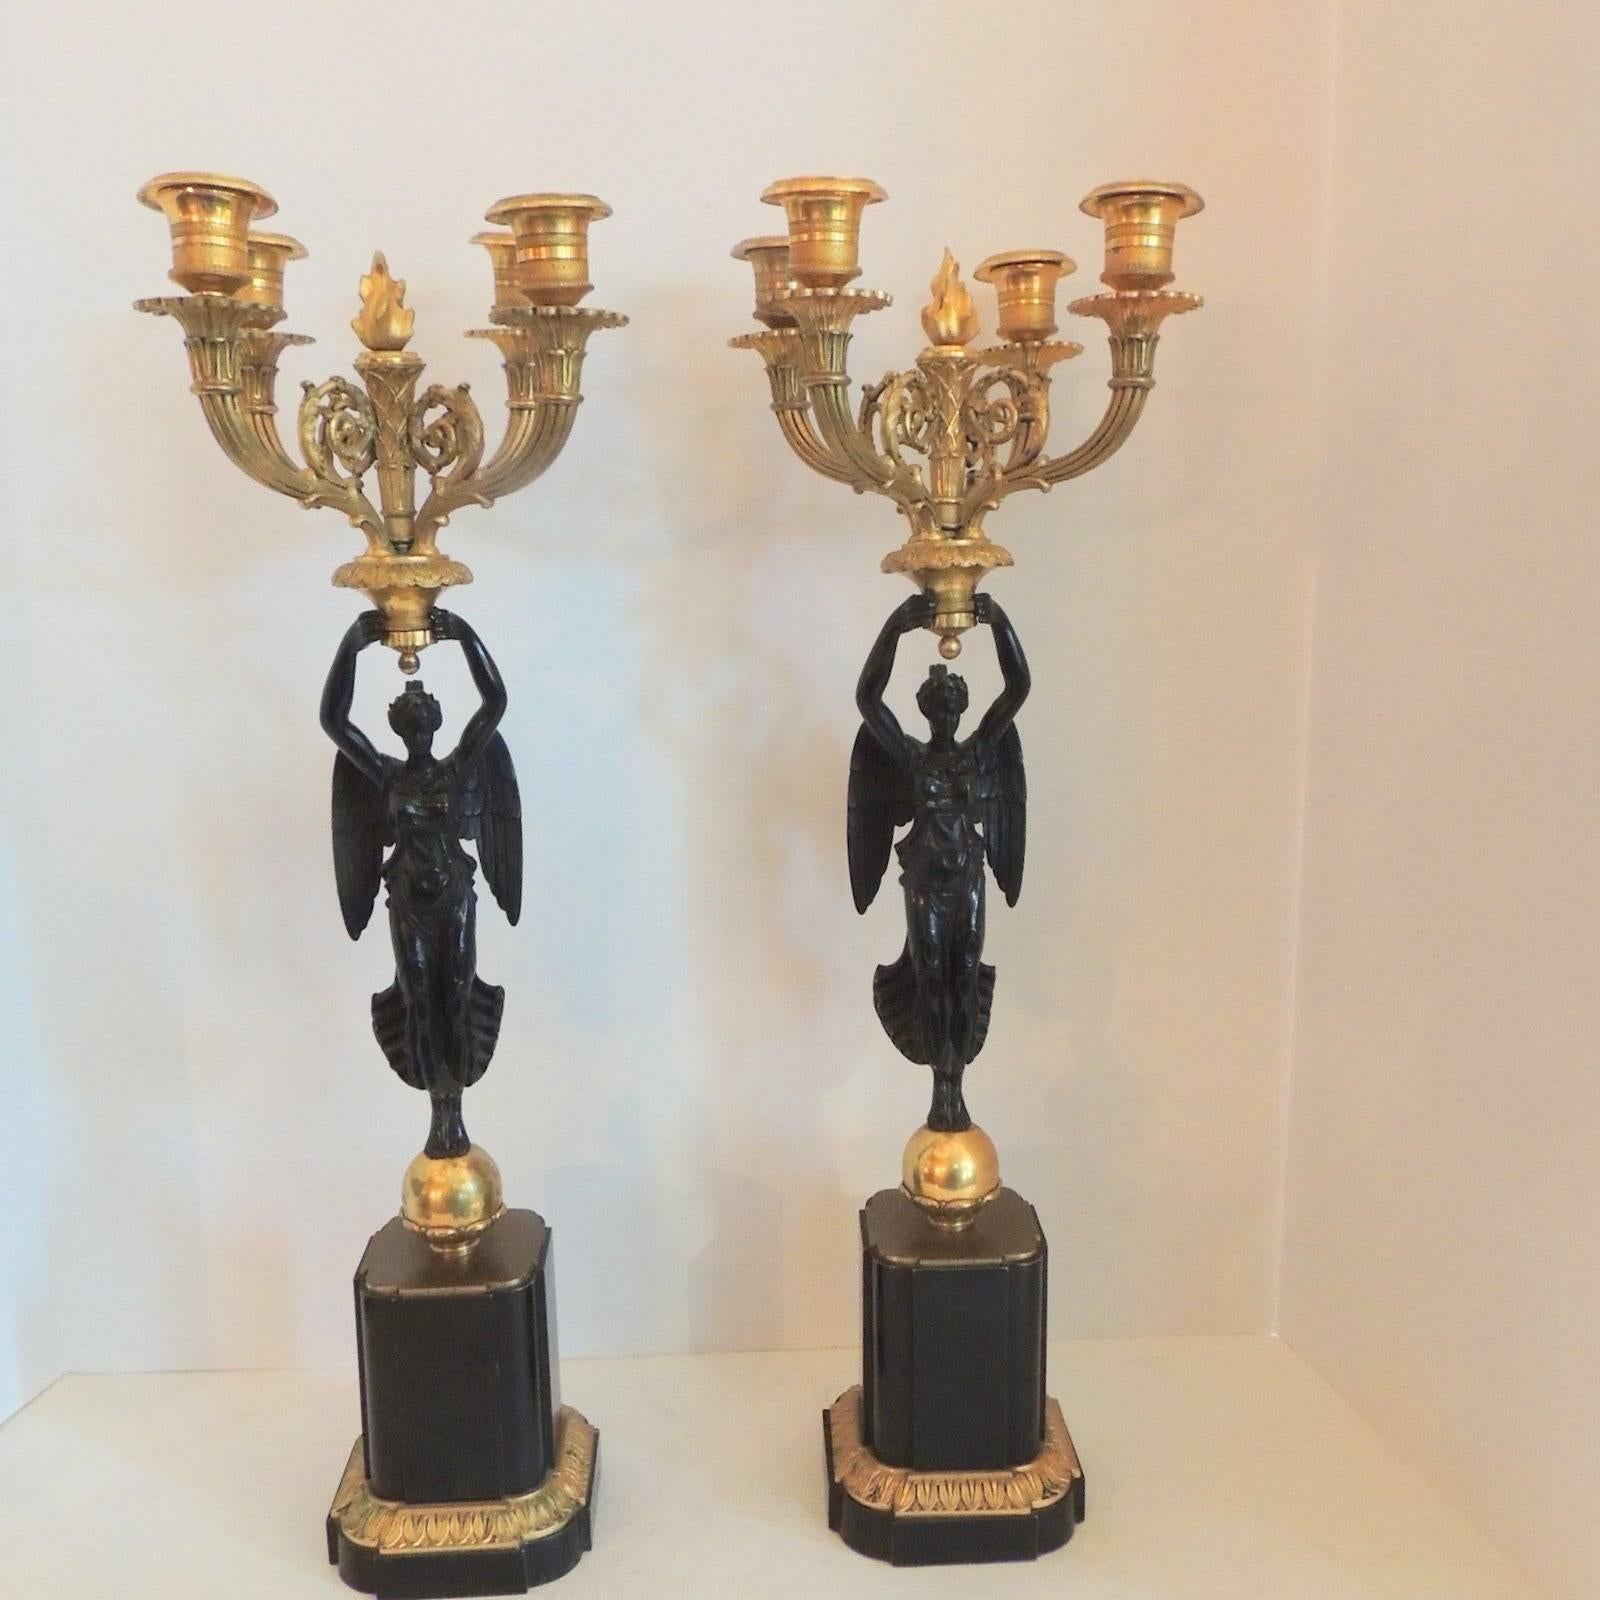 Wonderful pair of French Empire doré bronze four-arm candelabras with a patinated winged woman atop a bronze sphere and decorated pedestal. Wonderful etched details throughout the bronze arms and the center flame.

Measures: 21